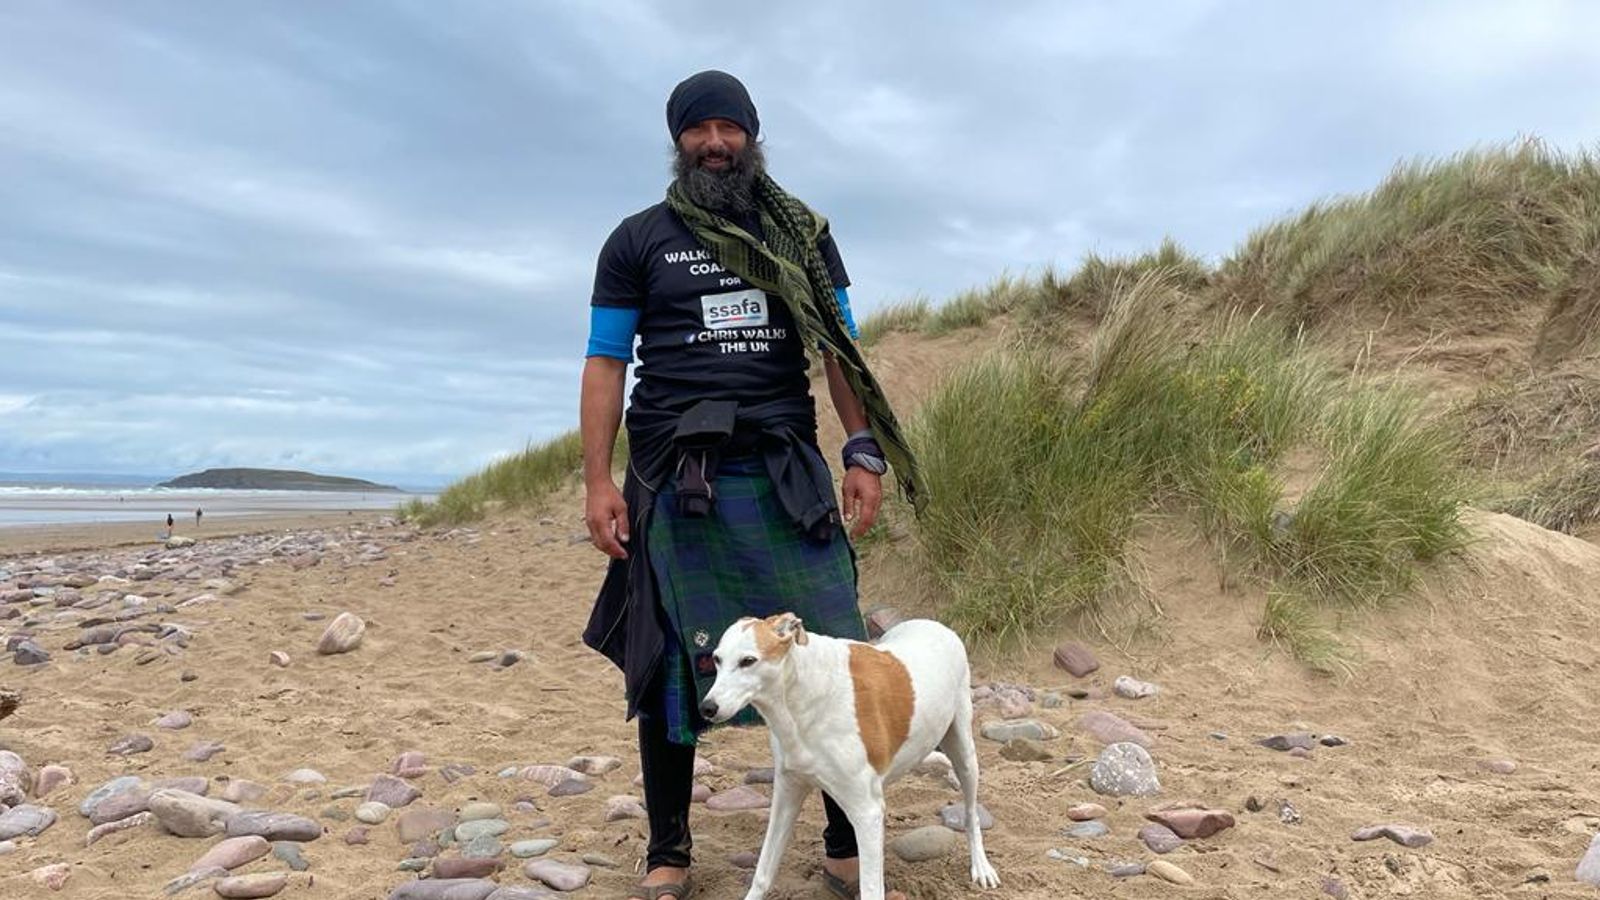 Man started family and spent COVID lockdown on remote island during six-year charity walk along UK coastline